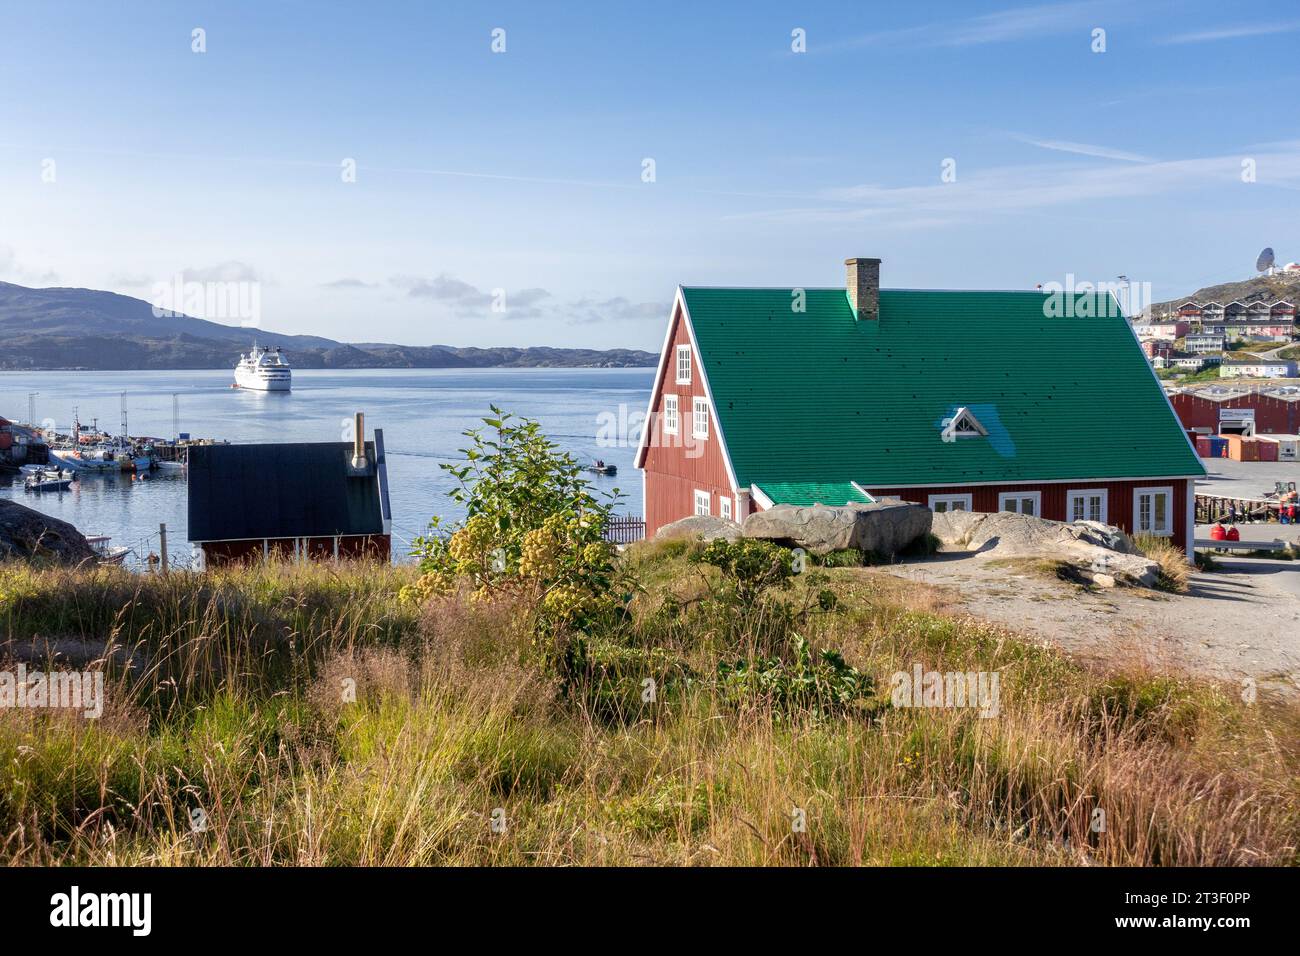 Traditional Greenland House In The Town Of Qaqortoq Greenland, Looking At The Port Area In The Early Morning Stock Photo